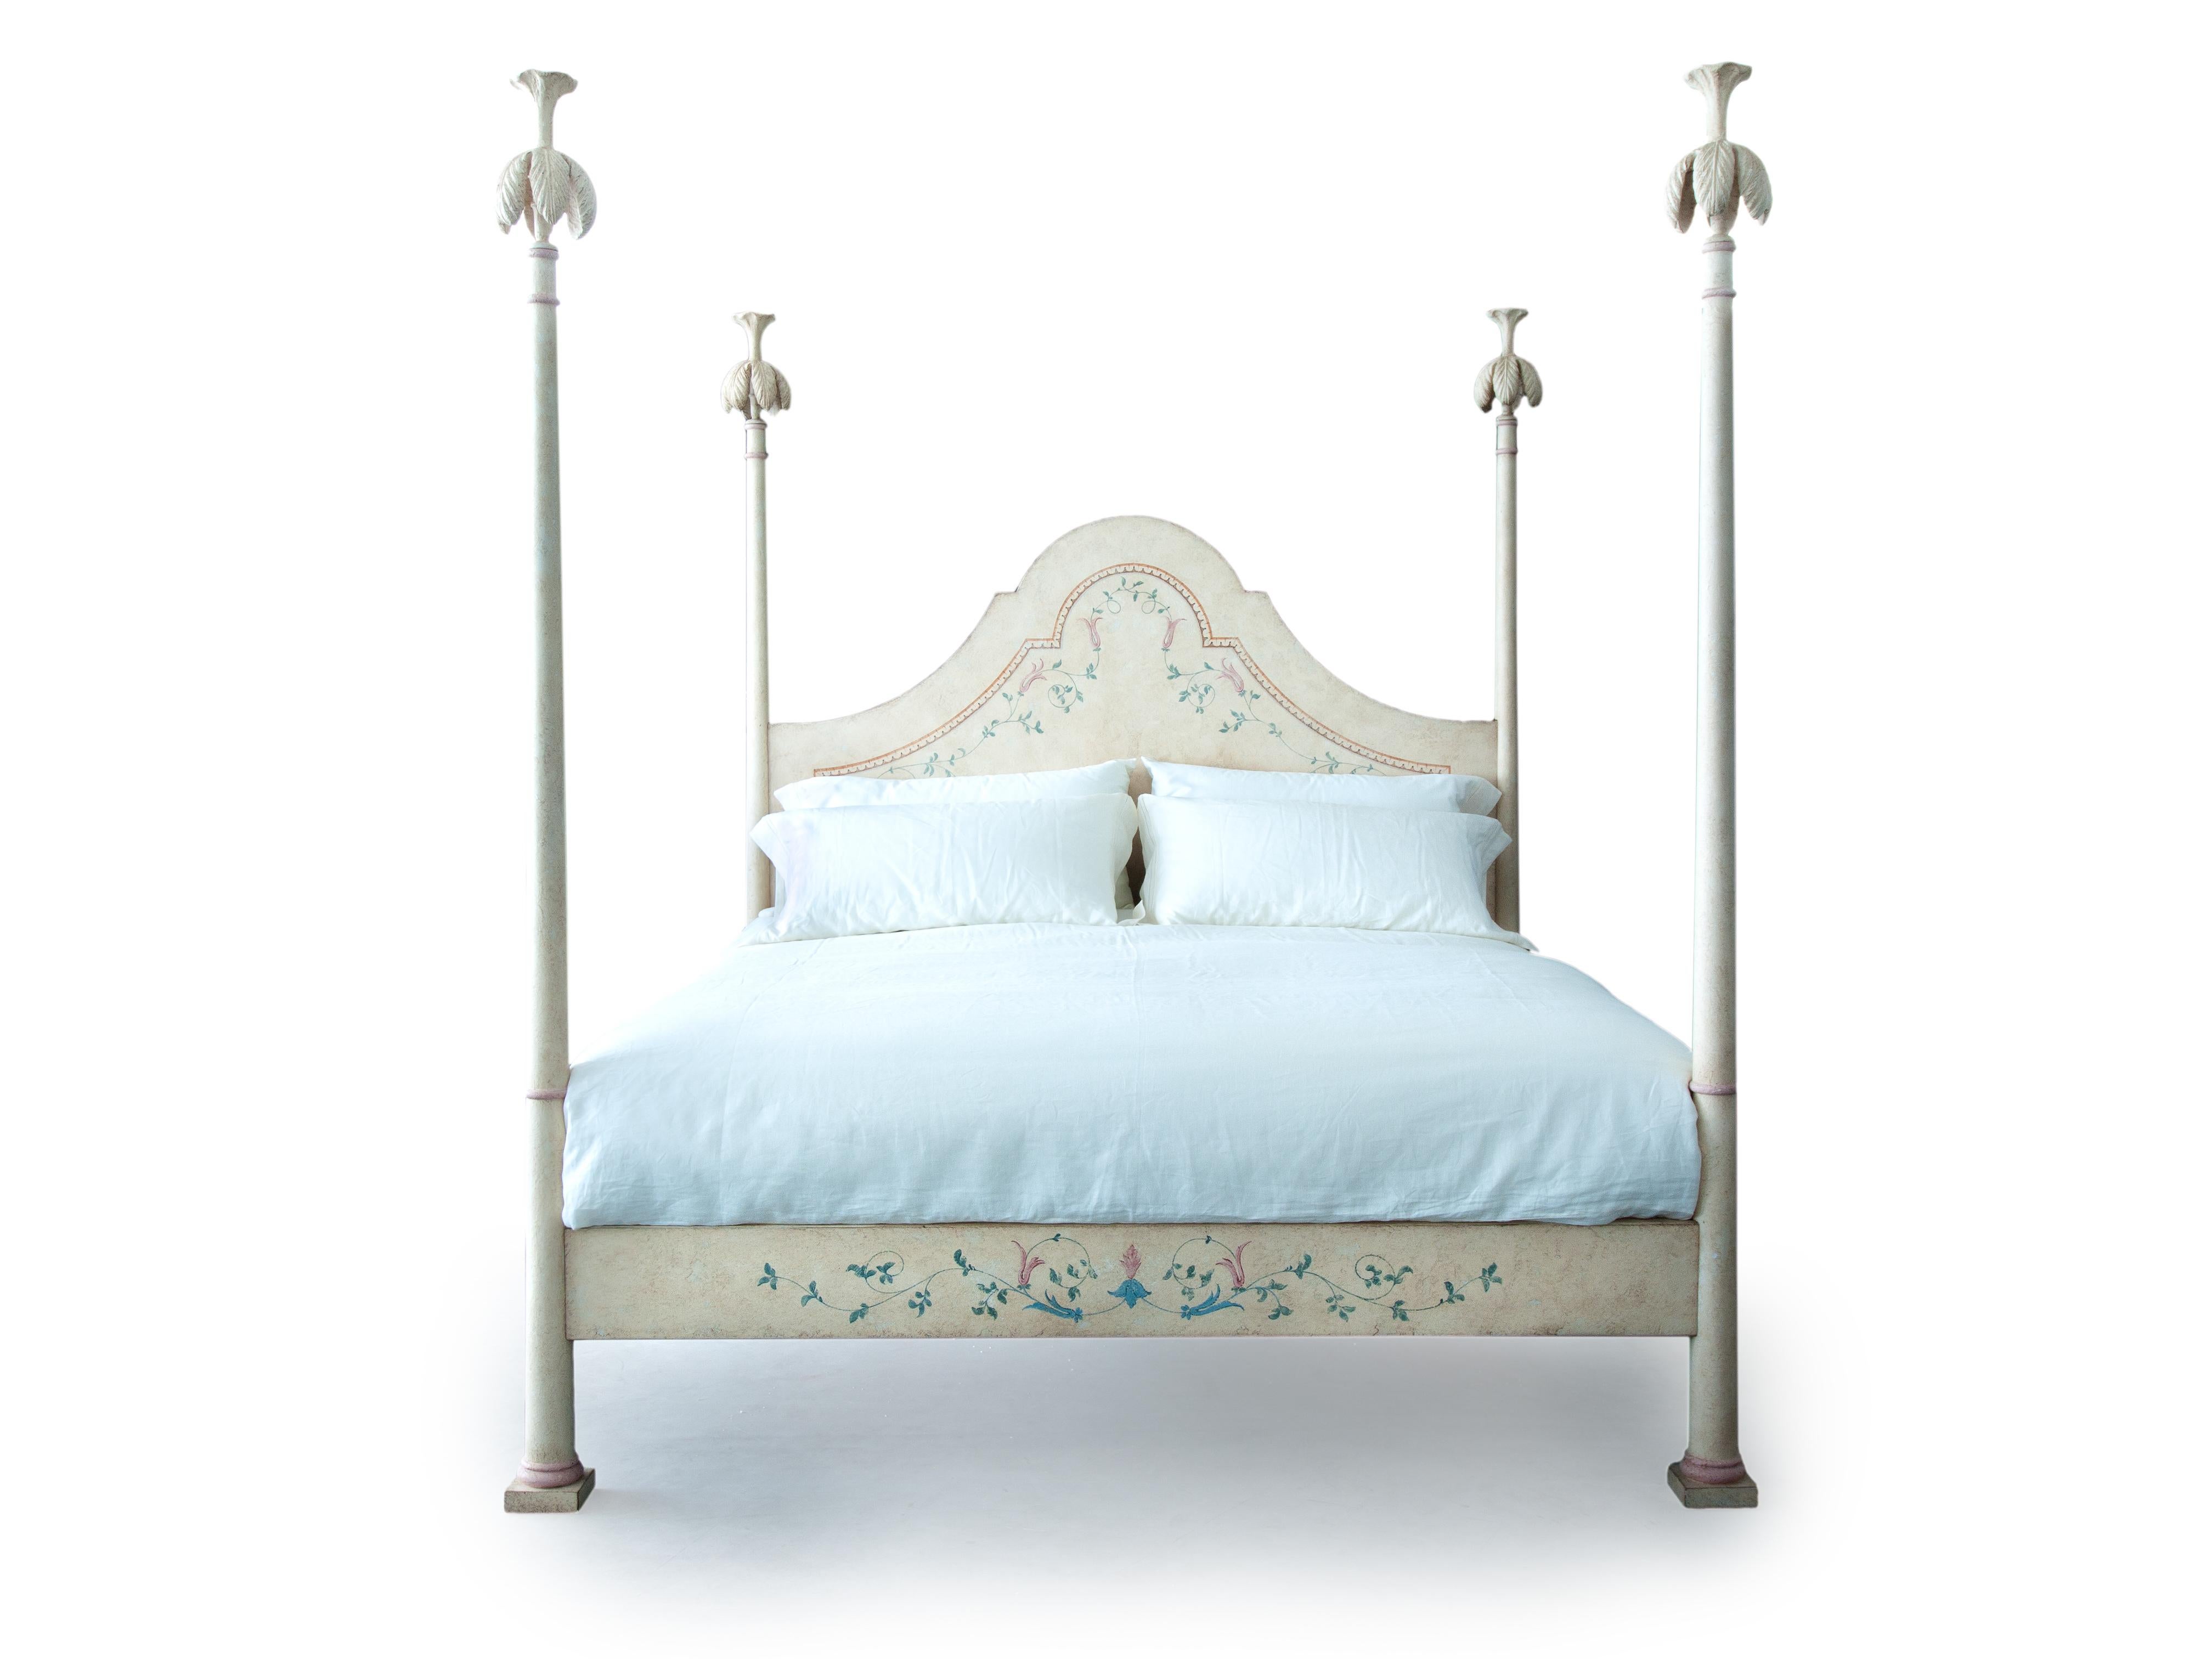 Our ivory hand-painted roma bed, full posts with lotus finials.
From our Hand-Painted Furniture Collection, our ivory Roma bed is surely one of our Best-Seller Pieces. Its high Headboard is like a canvas, gracefully hand-Painted with 18th Century